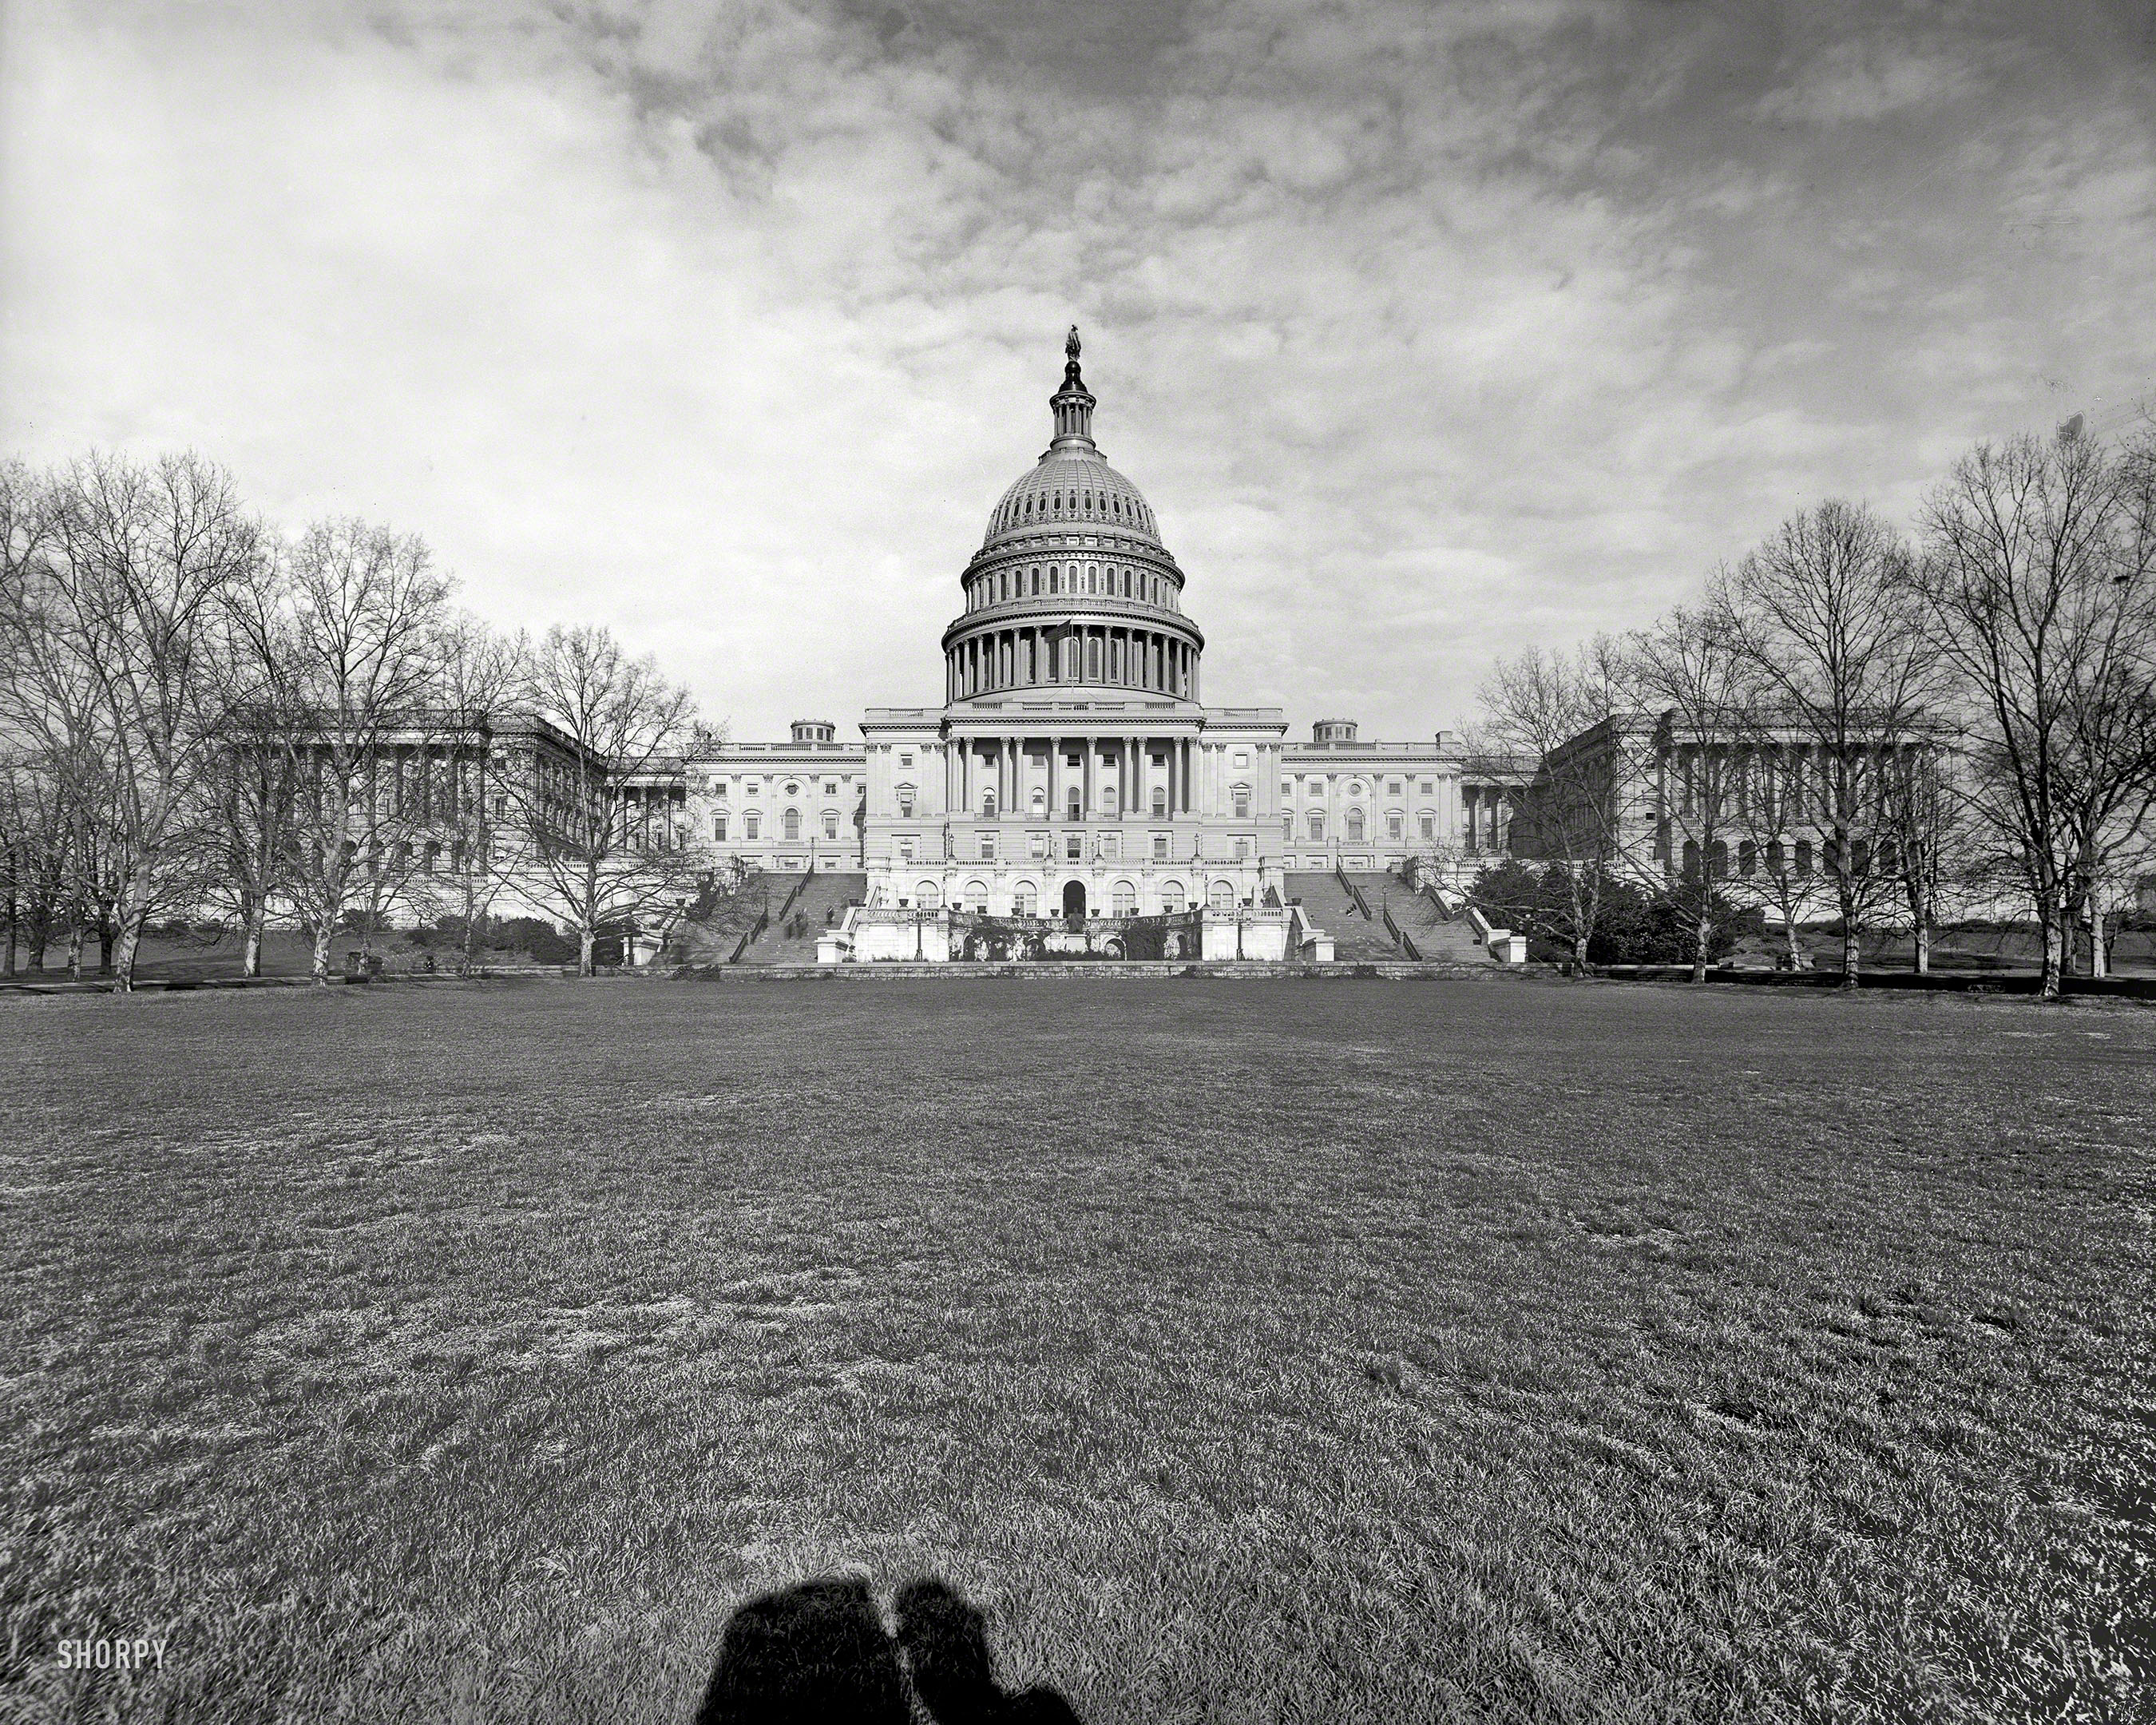 Circa 1908. "West front, U.S. Capitol, Washington." Today only, a tricameral legislature. 8x10 glass negative, Detroit Publishing Co. View full size.